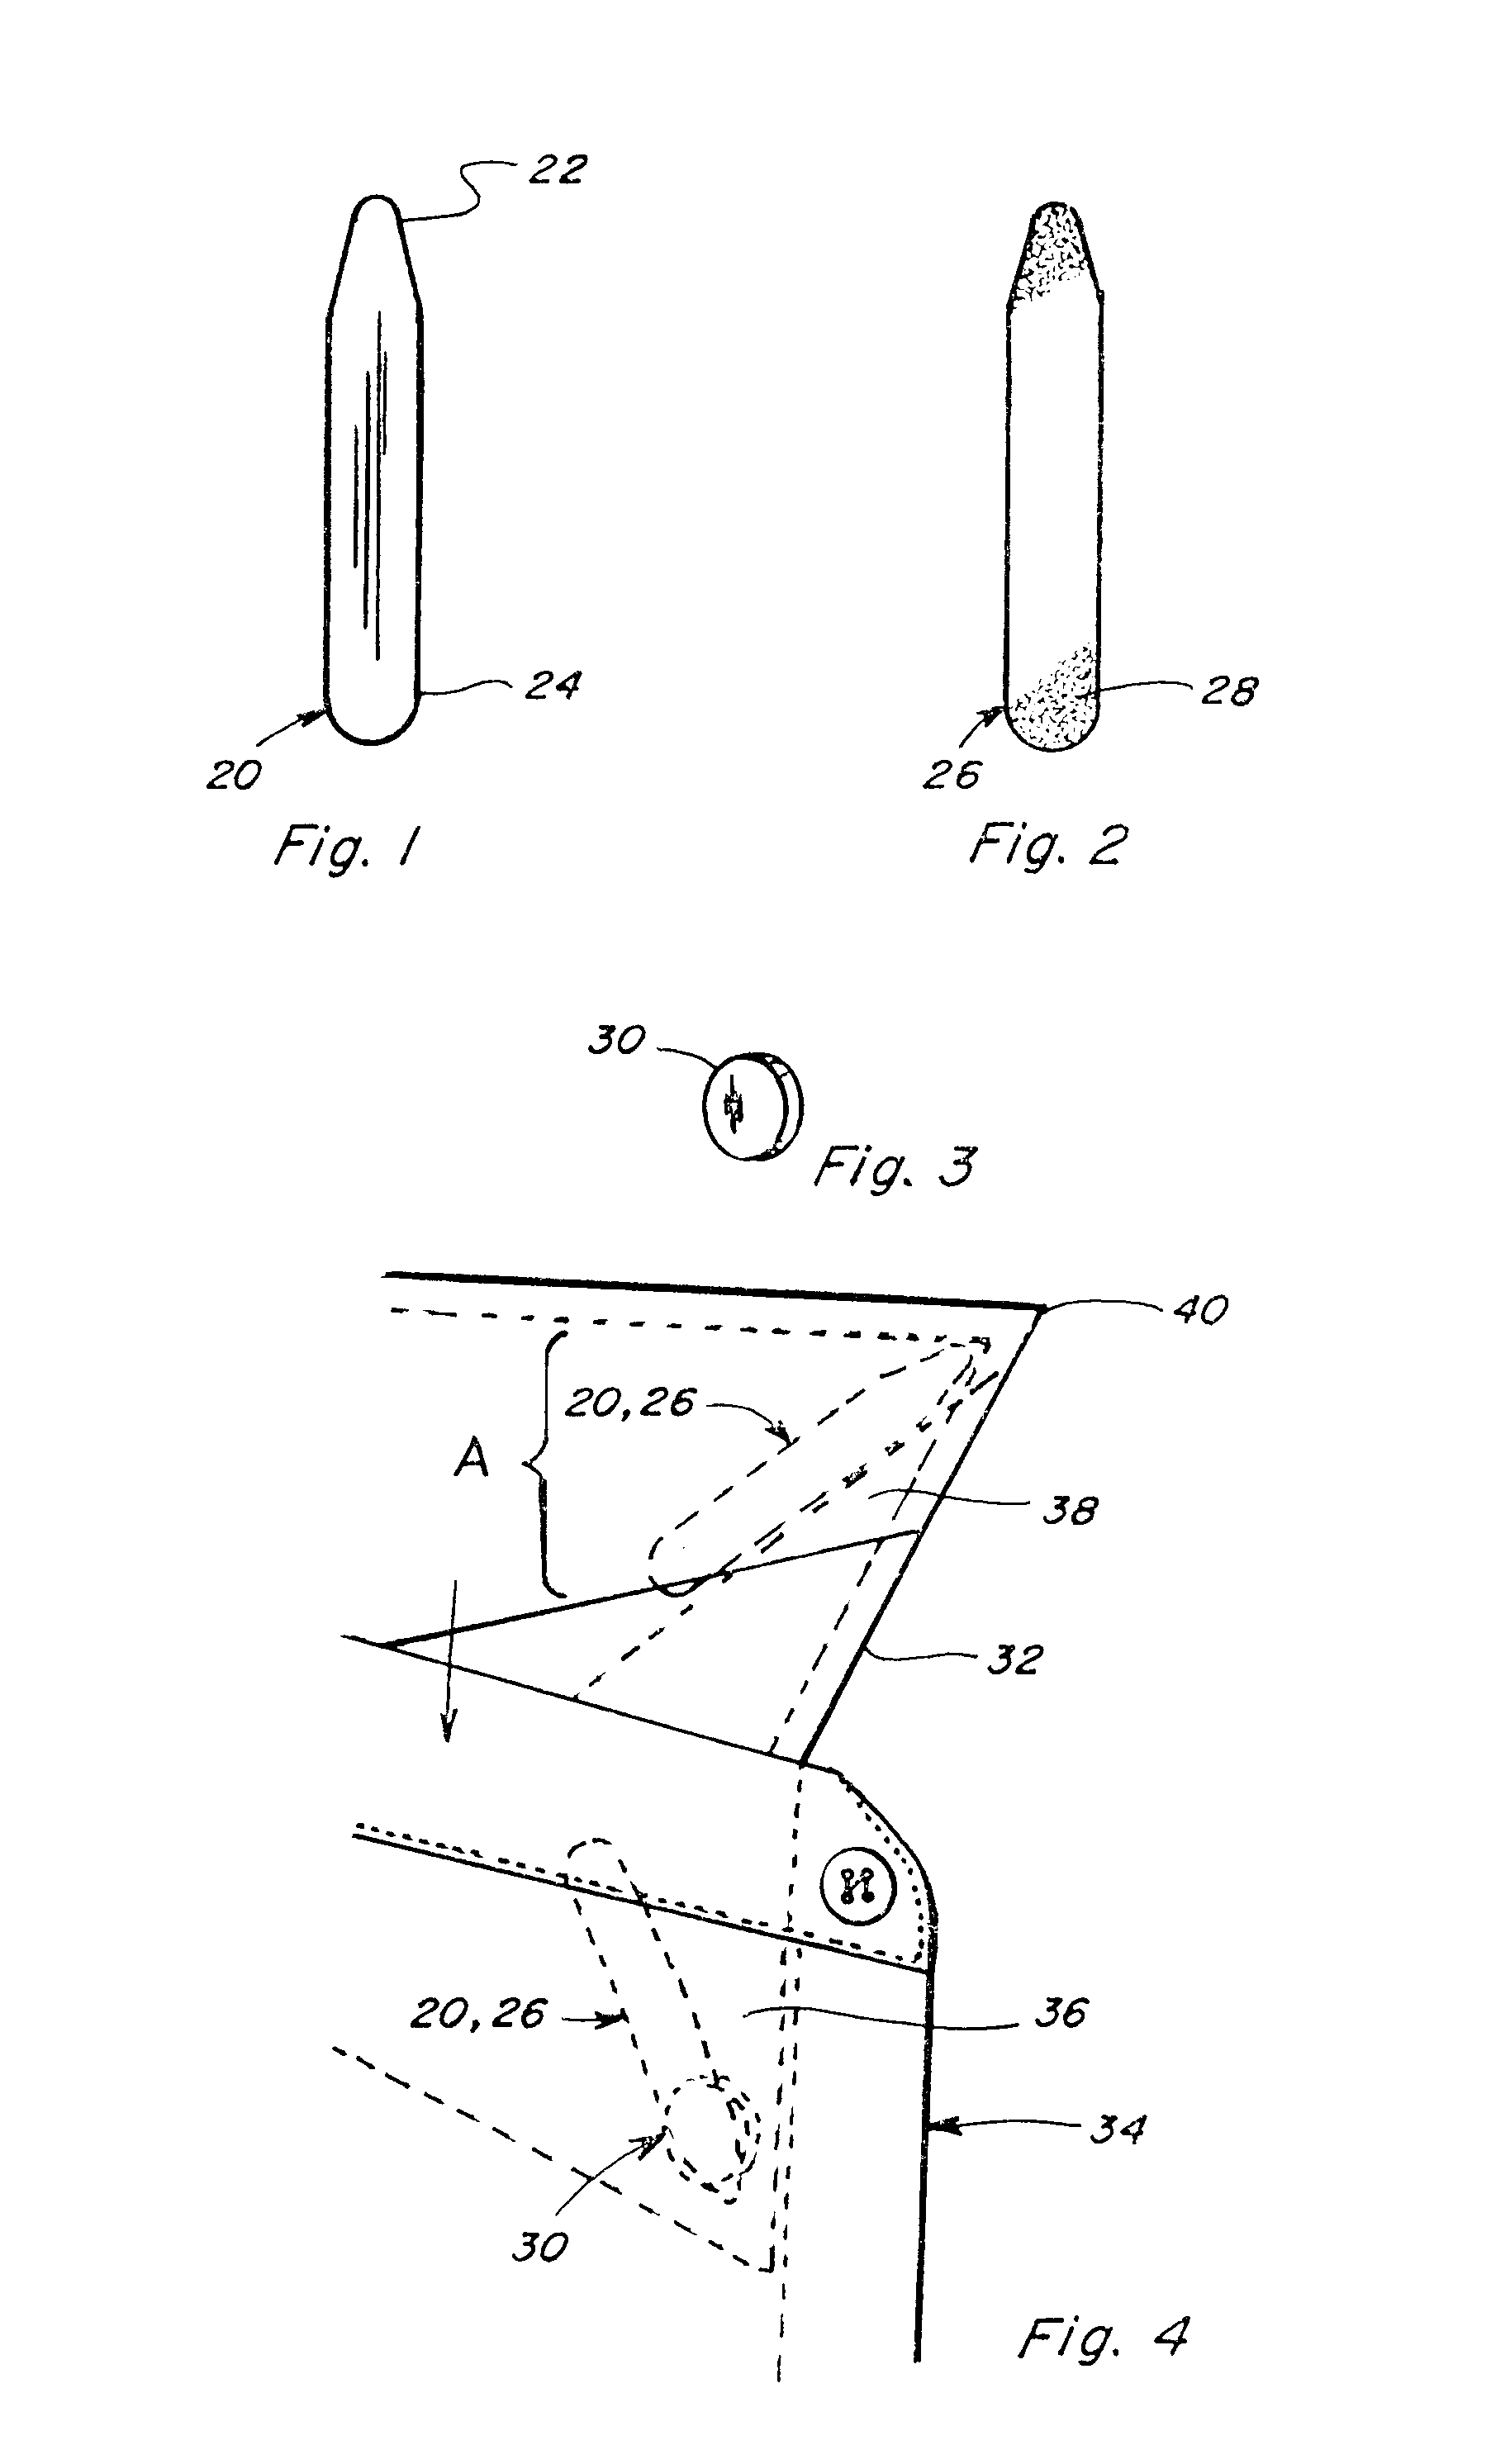 Apparatus for keeping a shirt collar aligned and fastened, magnetically